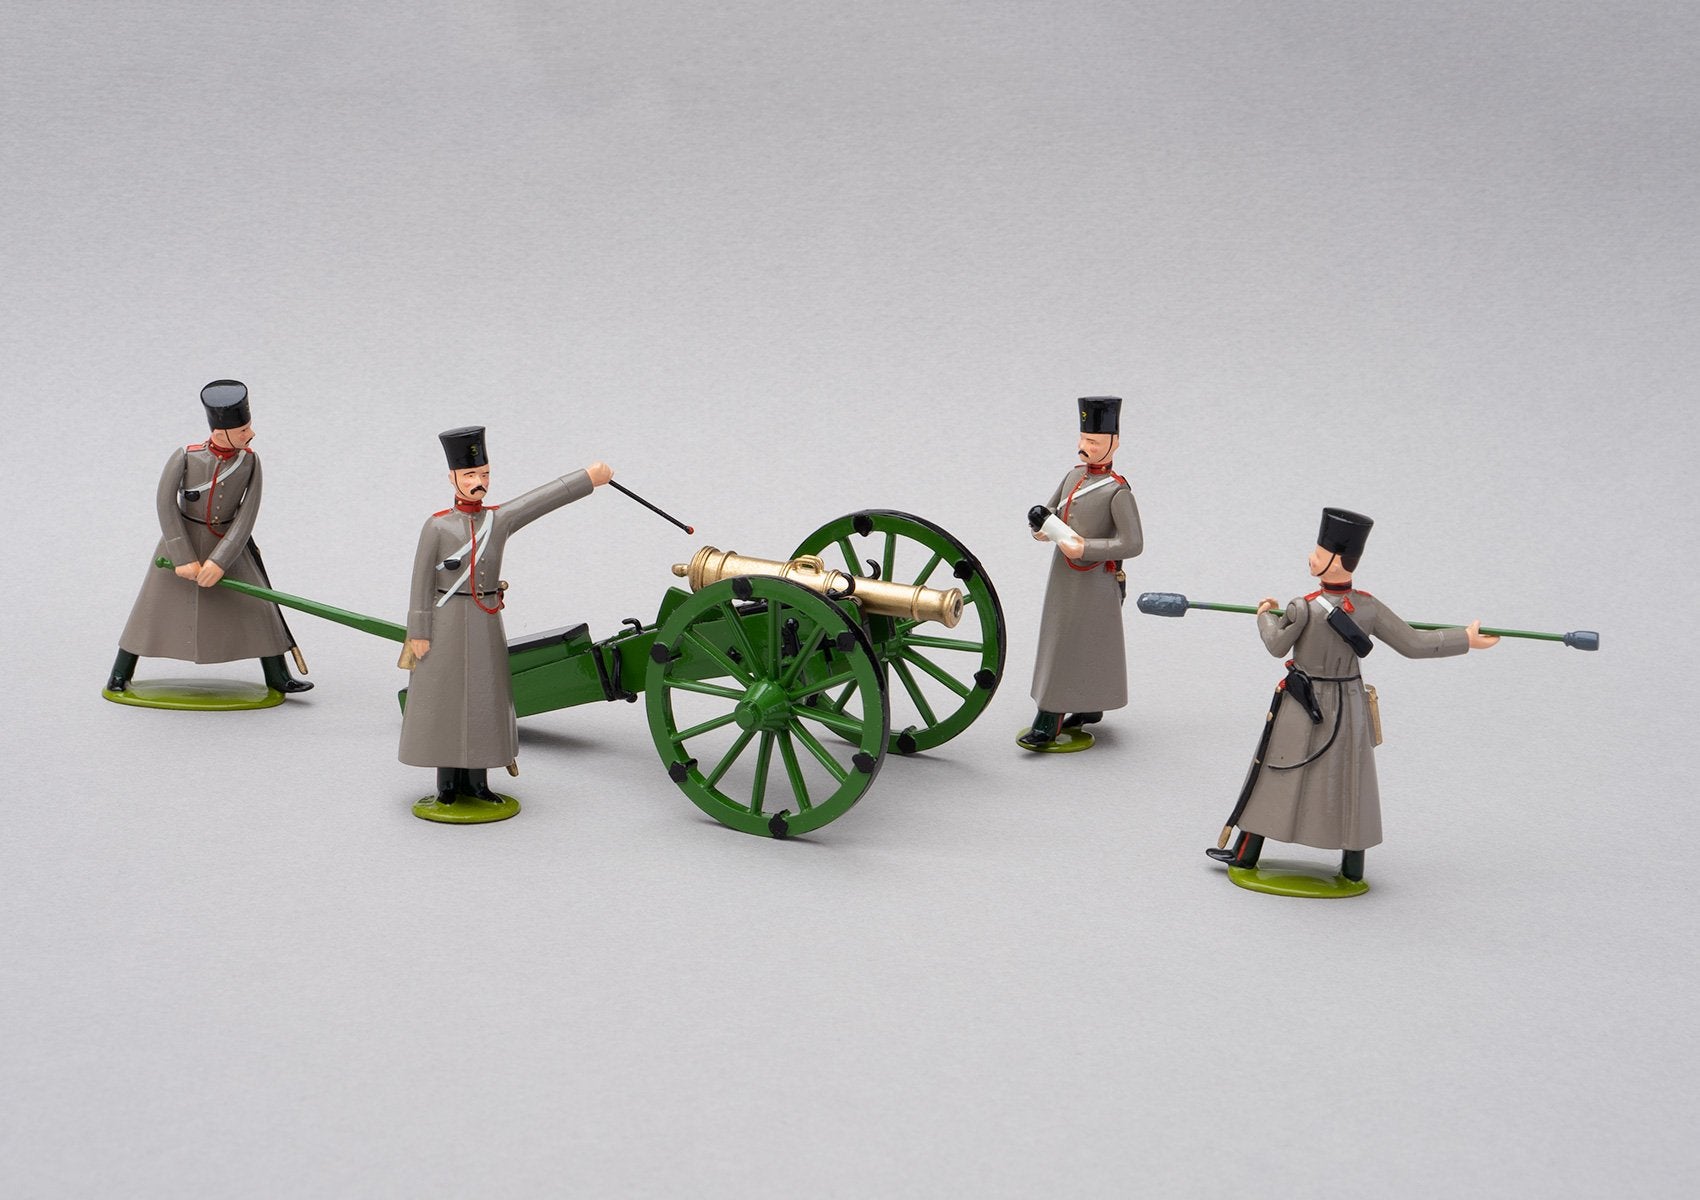 Set 79 Don Cossack Artillery 1854 | Russian | Crimean War | One artillery piece supported by four gunners | Balaclava, Sevastapol, Alma | © Imperial Productions | Sculpt by David Cowe